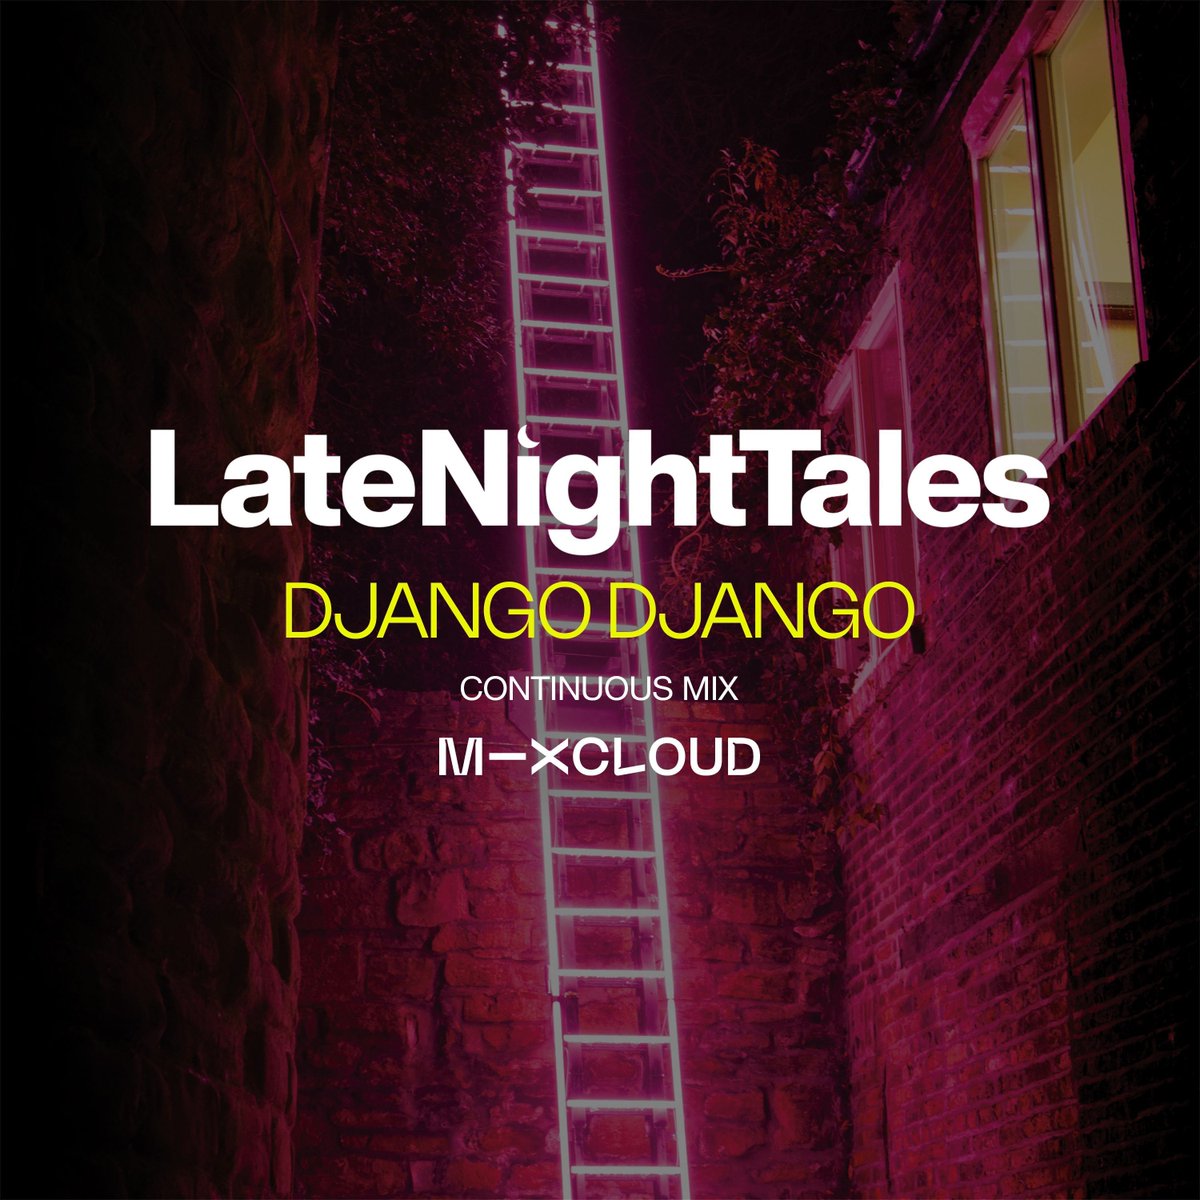 RELEASED TEN YEARS AGO TODAY

The full, continuous mix of Late Night Tales: Django Django (@TheDjangos) - first released on 11th May 2014 - is now available to stream on our @Mixcloud channel. 

Listen now at latenighttales.lnk.to/django2024.